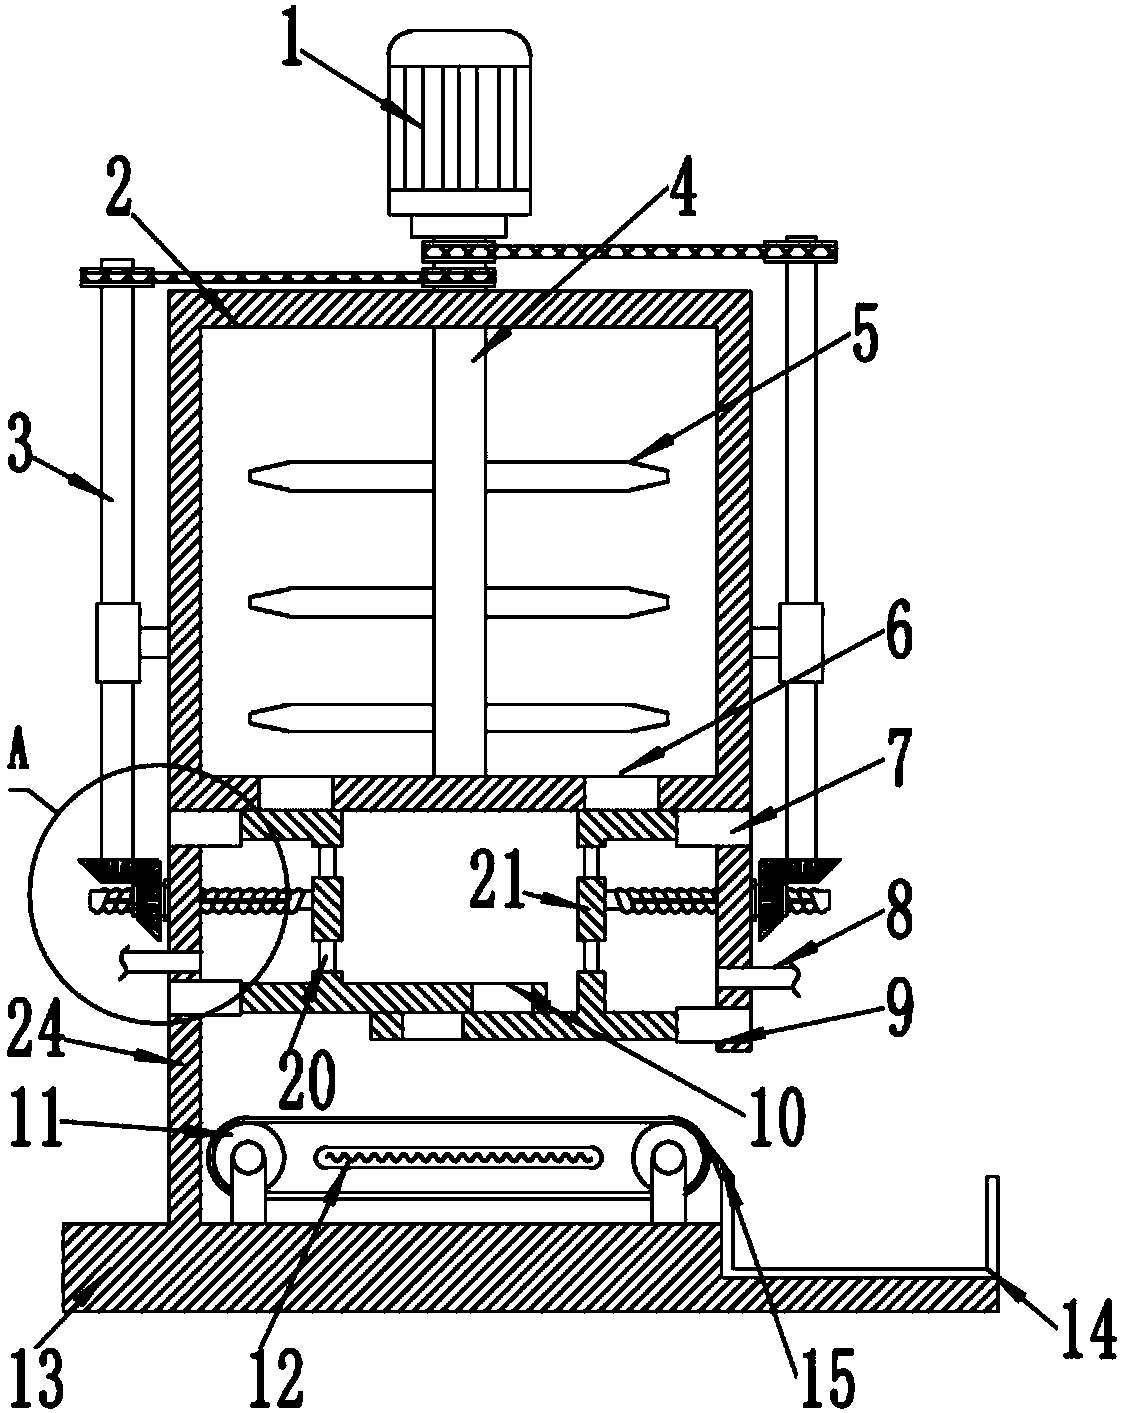 Extrusion sludge dewatering and drying device